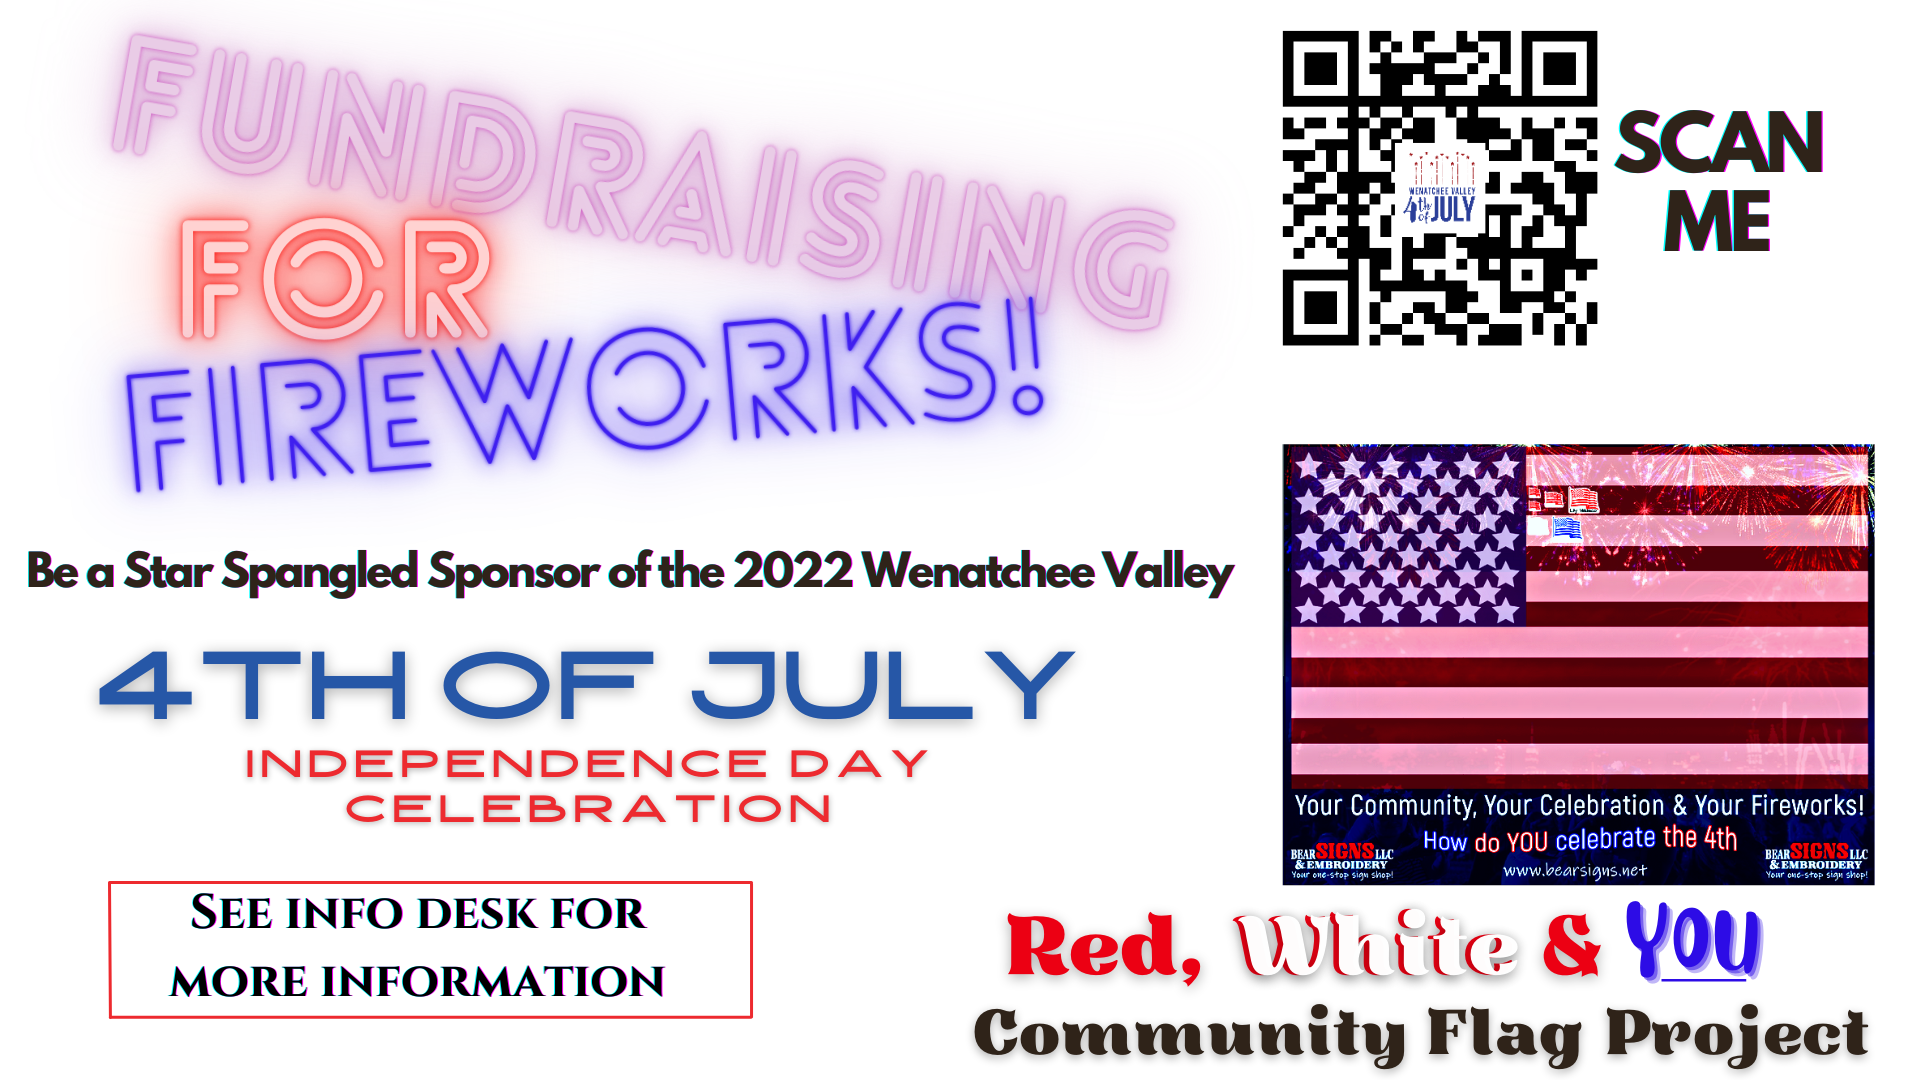 <h1 class="tribe-events-single-event-title">Fundraising For Fireworks!</h1>